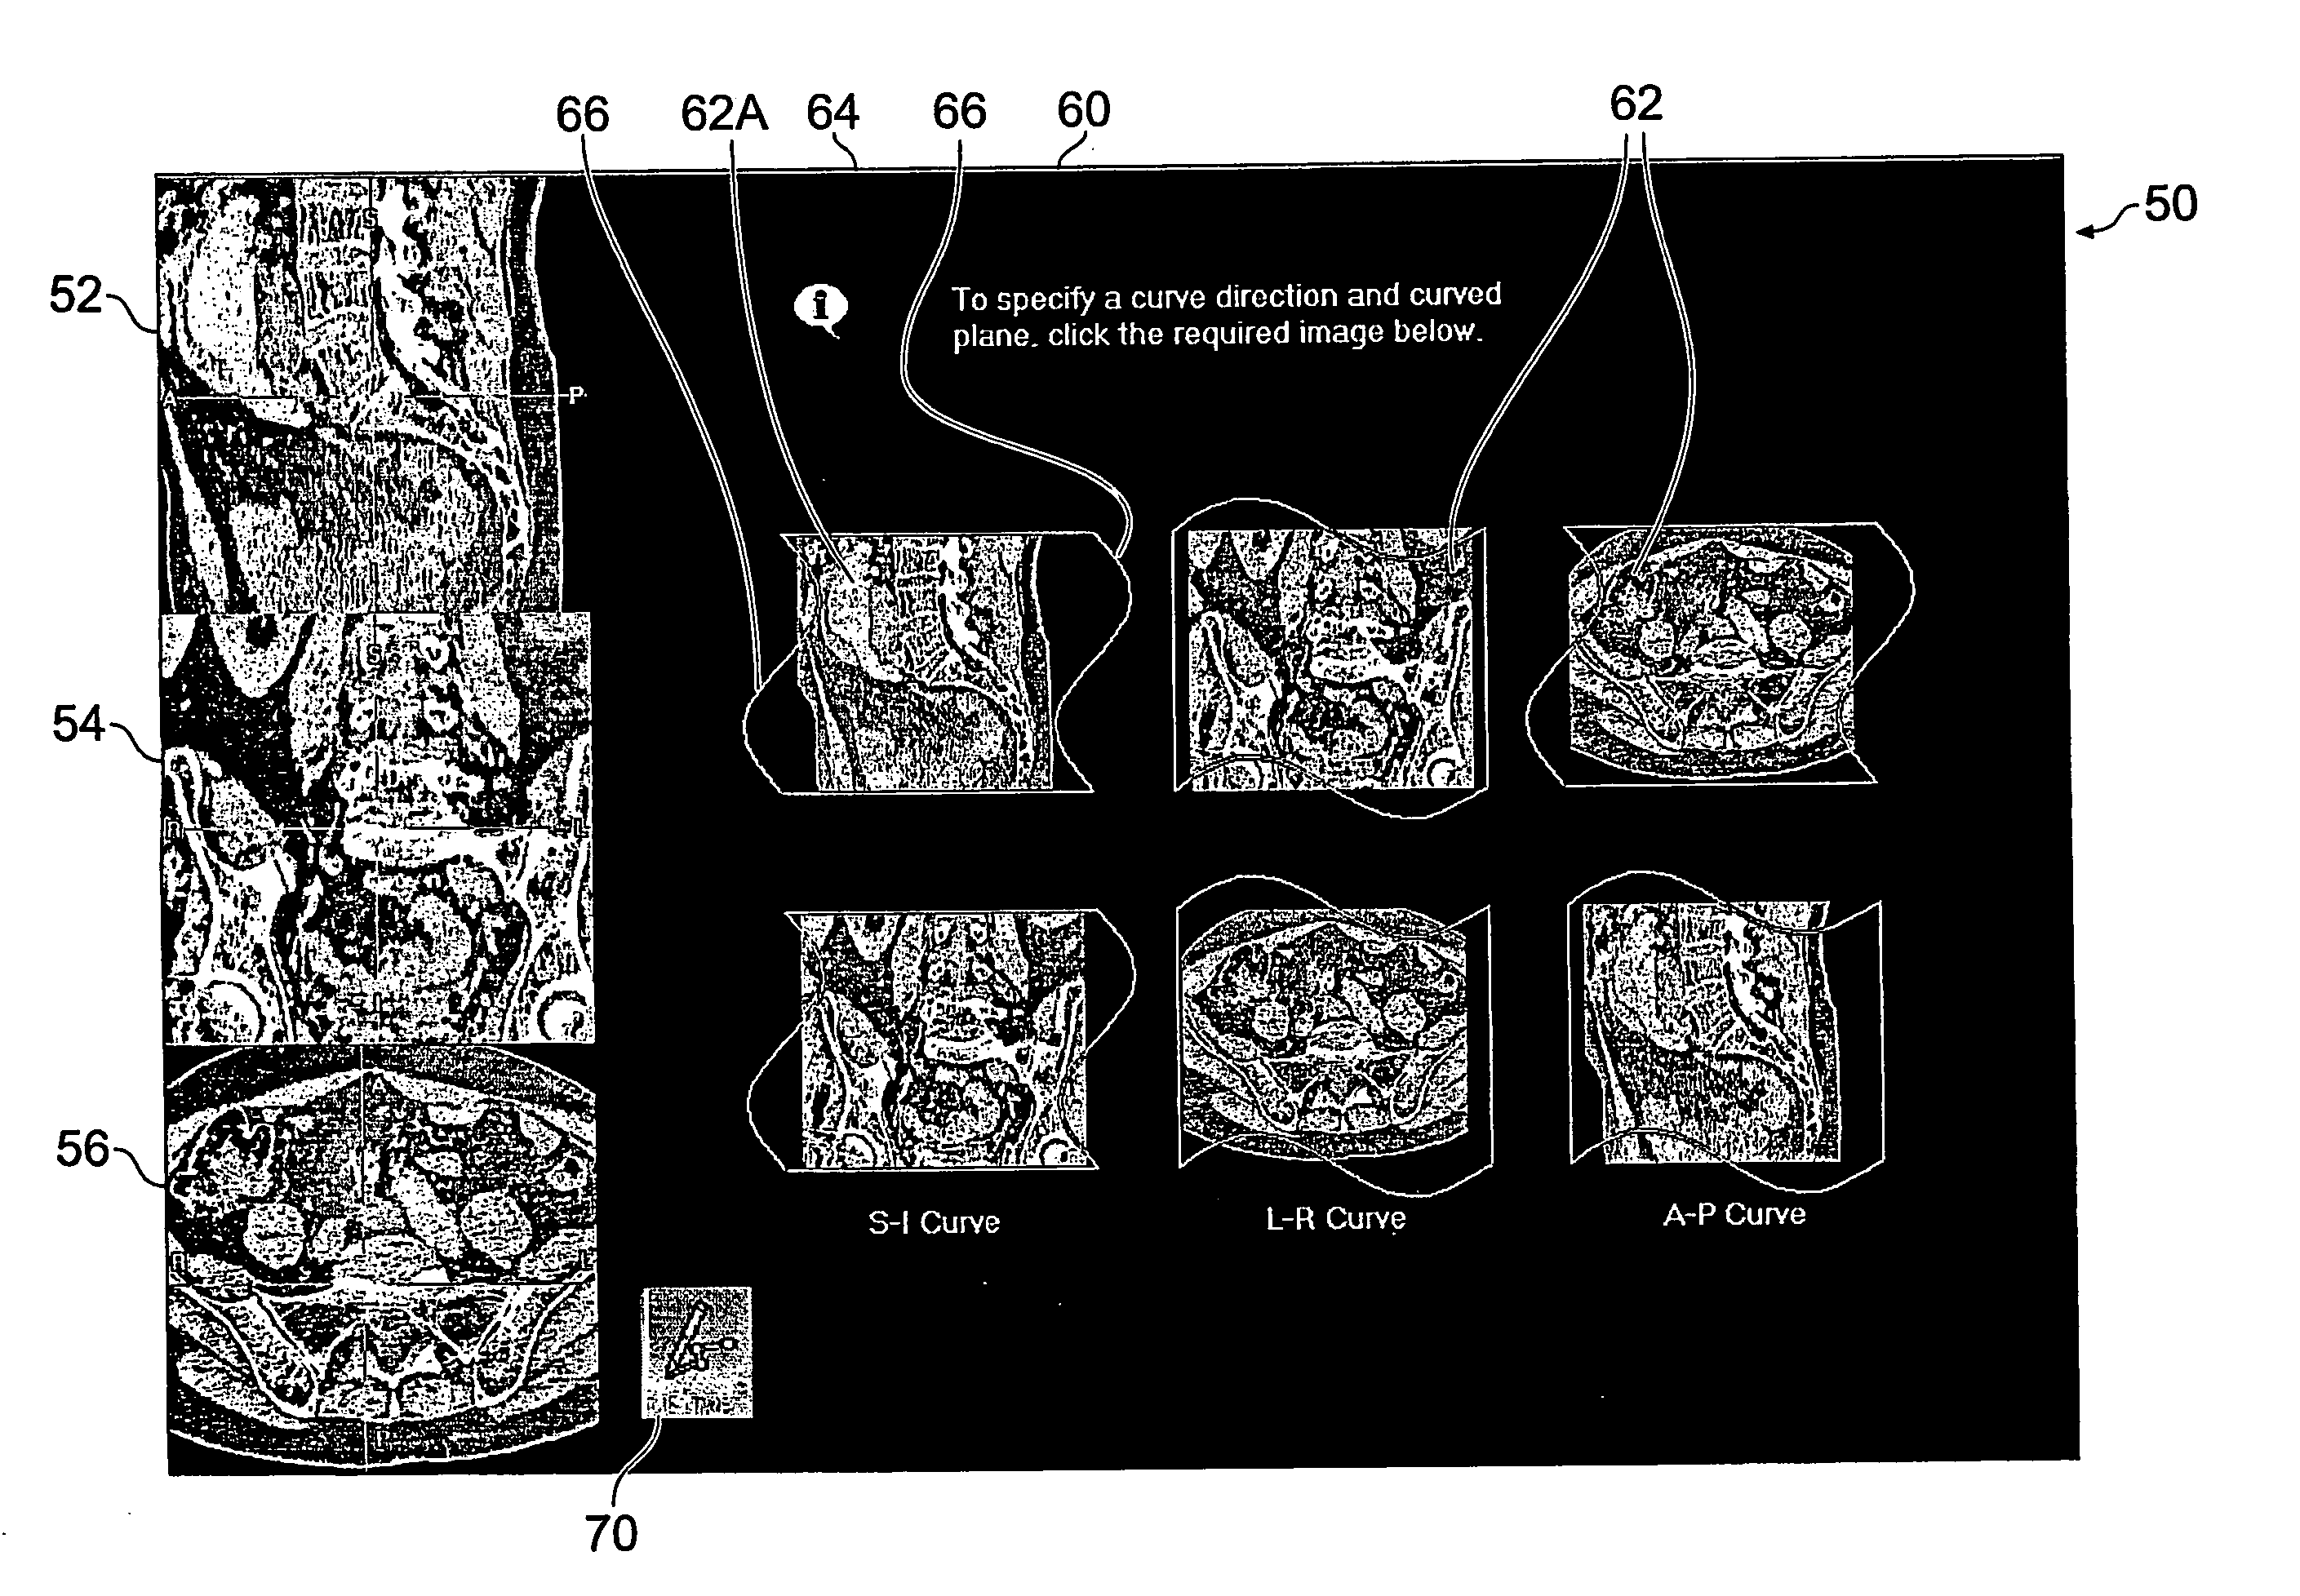 User-interface and method for curved multi-planar reformatting of three-dimensional volume data sets